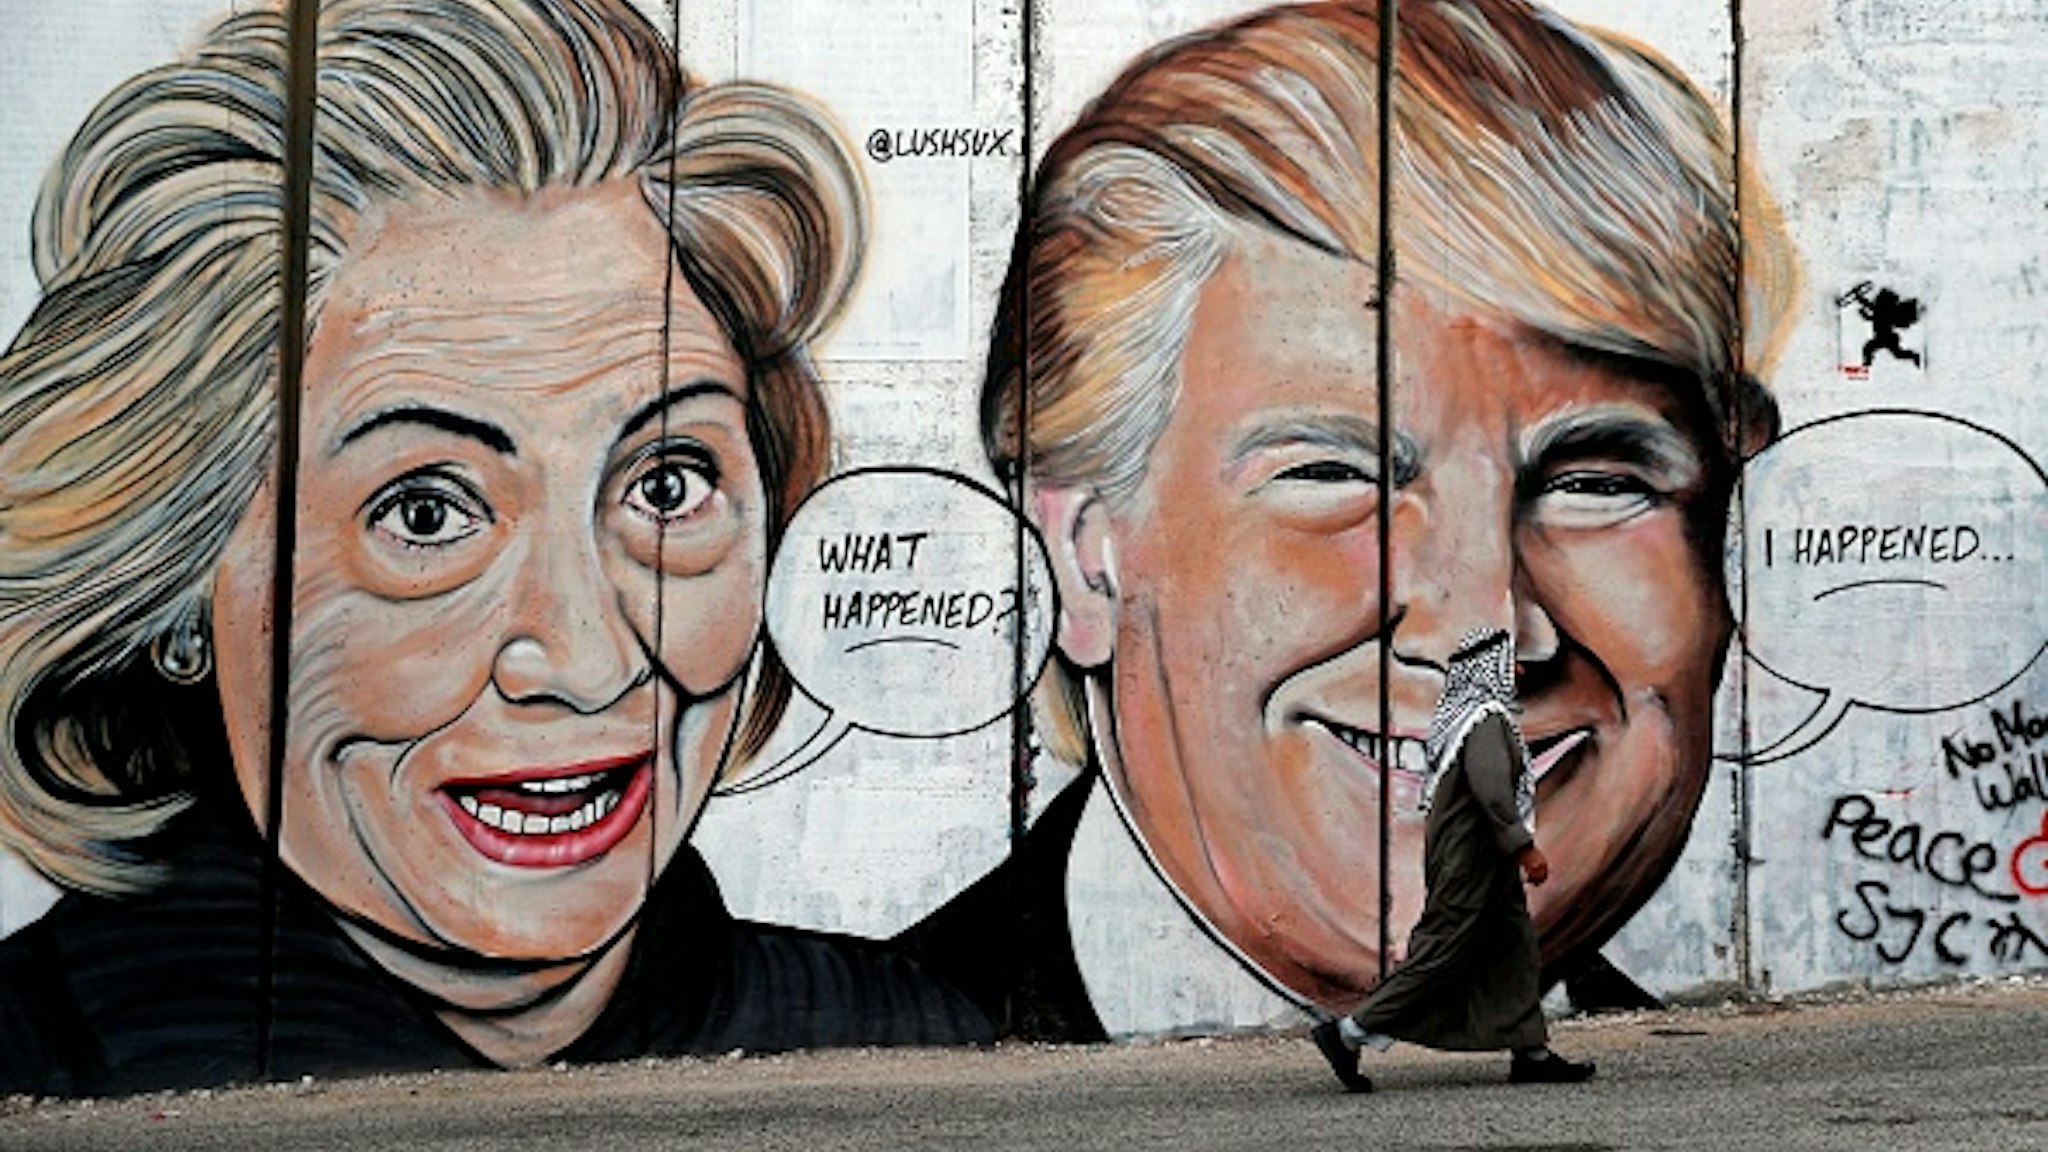 TOPSHOT - A Palestinian man walks past a newly sprayed graffiti depicting US presidential candidate Hillary Clinton and US President Donald Trump on the controversial Israeli separation wall separating the West Bank town of Bethlehem from Jerusalem on October 30, 2017.